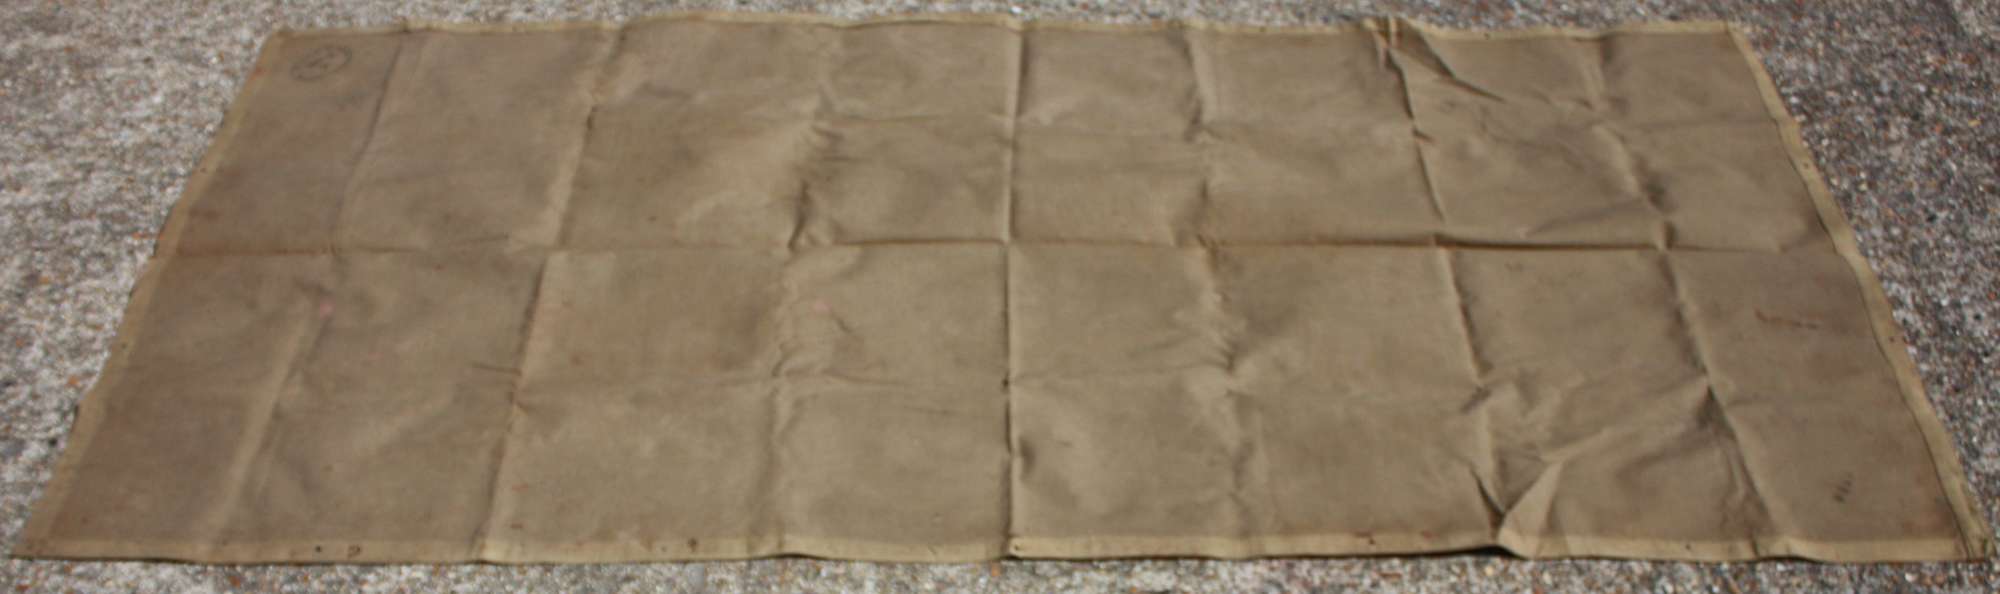 A BRITISH ISSUE 1942 DATED TAN GROUND SHEET